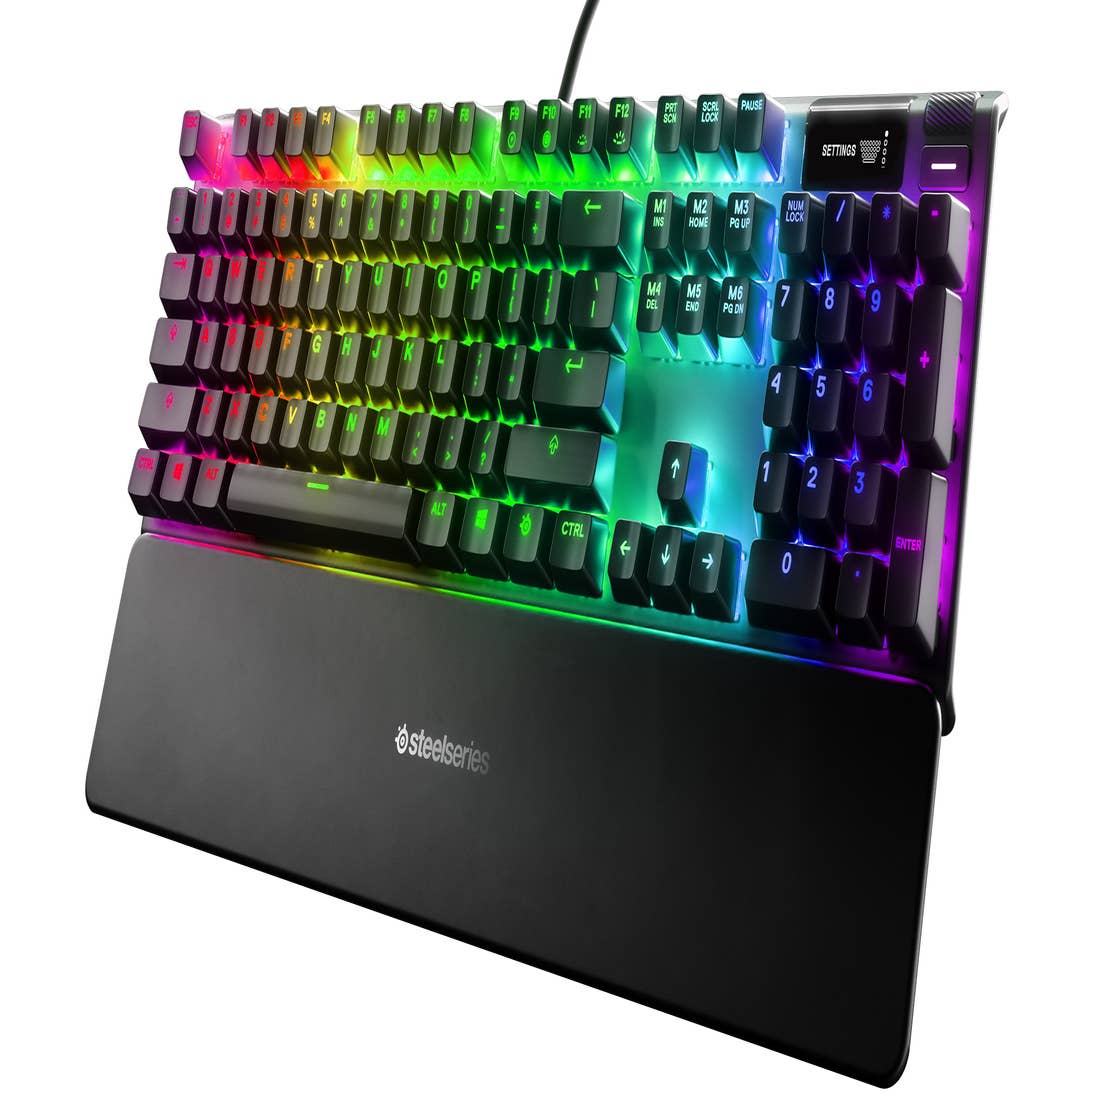 Razer Pro Type Ultra Keyboard Review - Nailing Gaming and Office